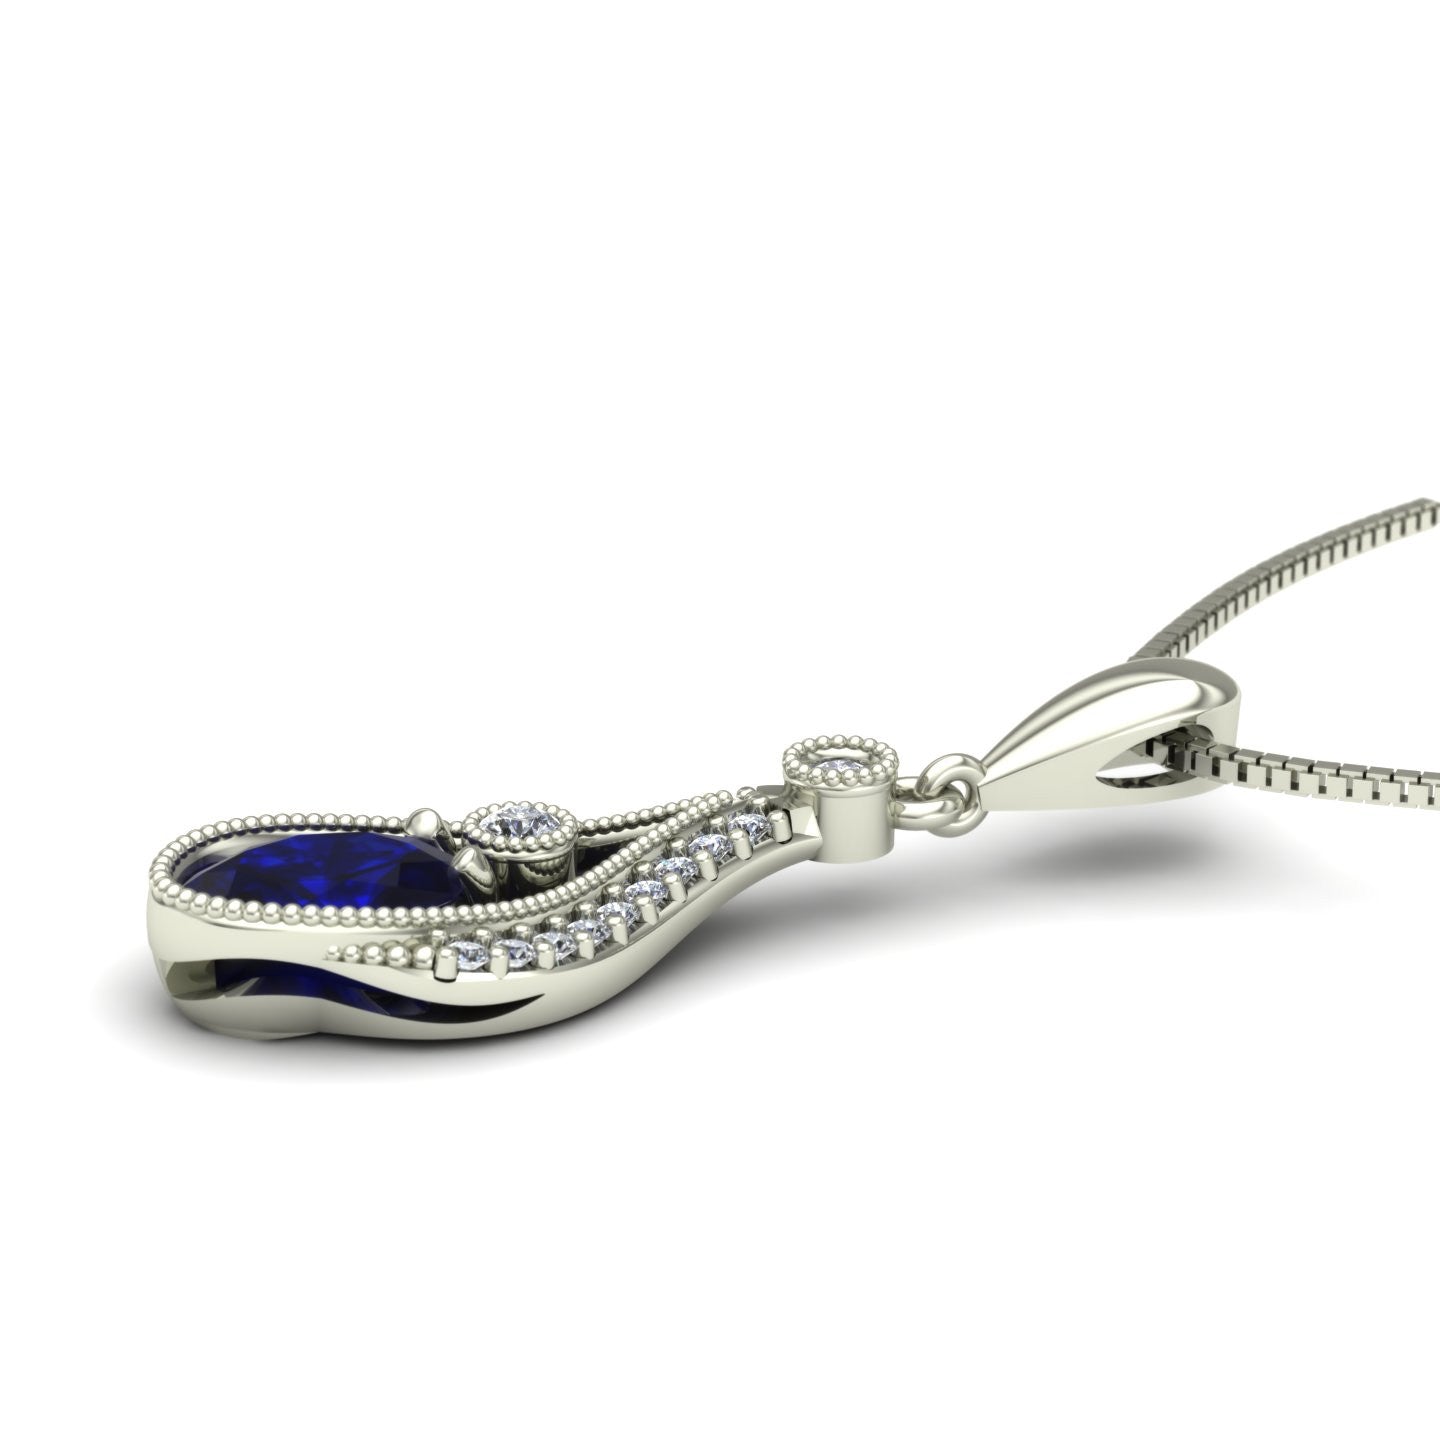 oval blue sapphire and diamond drop pendant in 14k white gold - Charles Babb Designs - 2